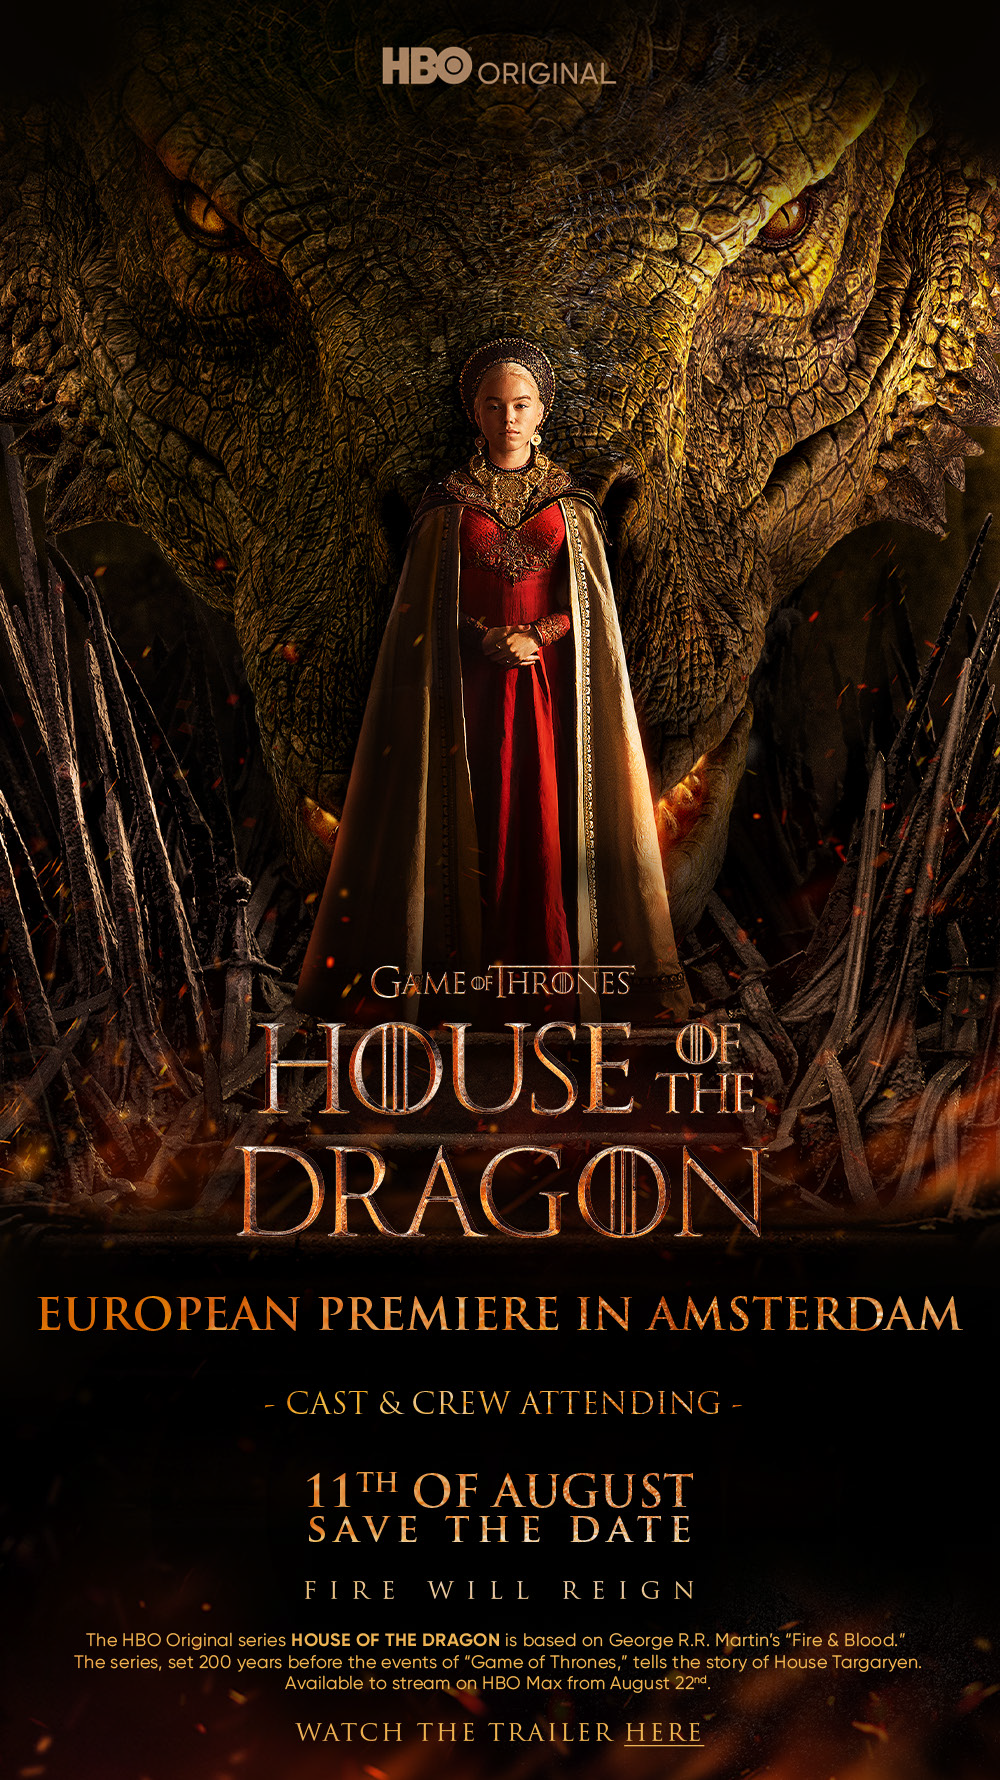 HBO Max - Fire will reign. House of the Dragon, a